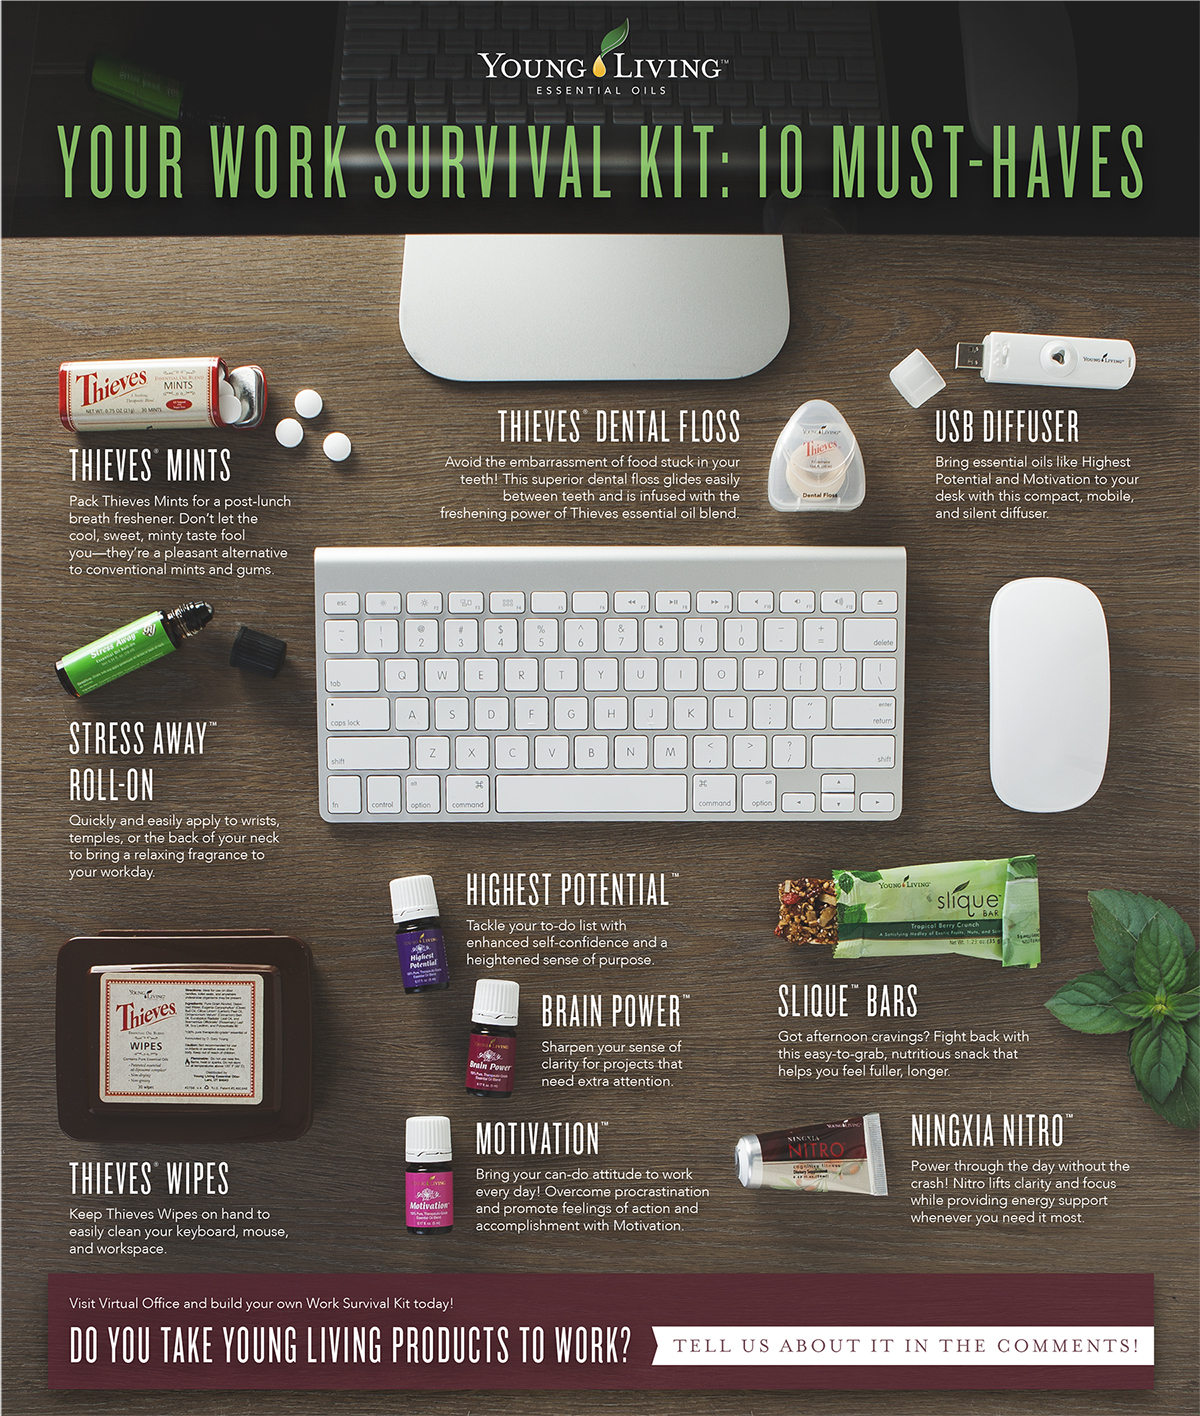 Your Work Survival Kit: 10 must haves